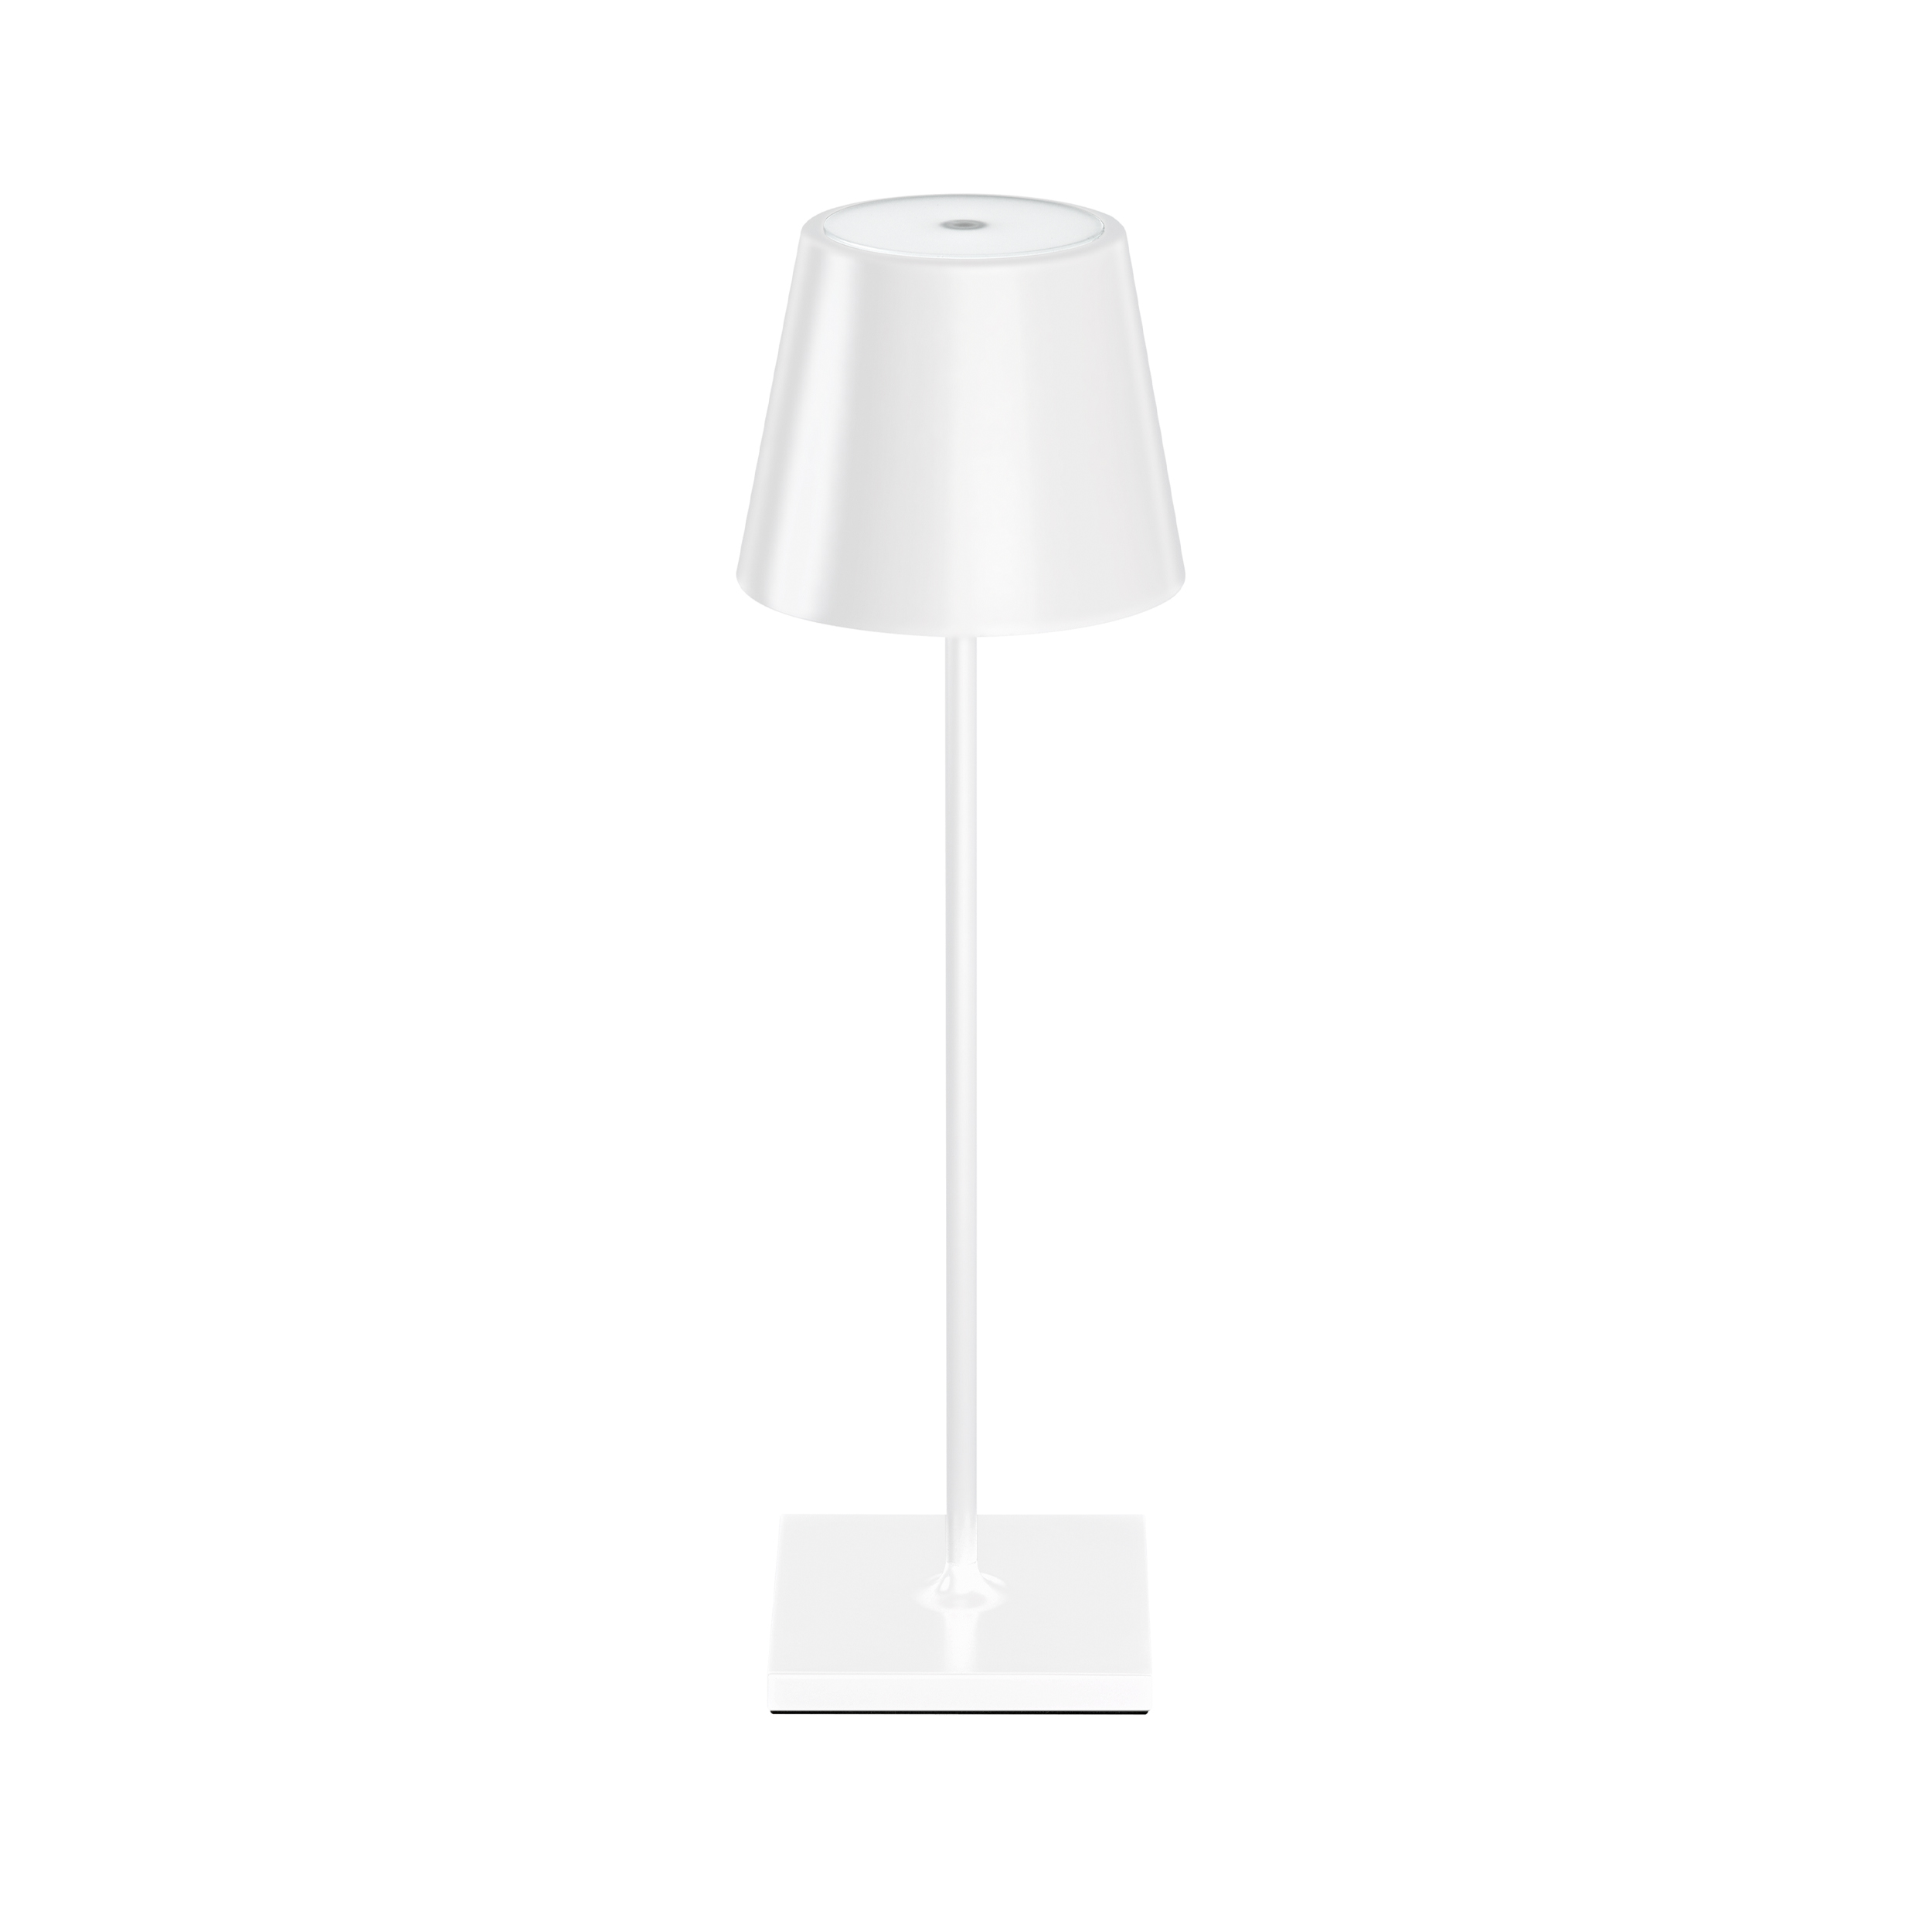 SIGOR warmweiss LED Lamp Schneeweiss NUINDIE Table